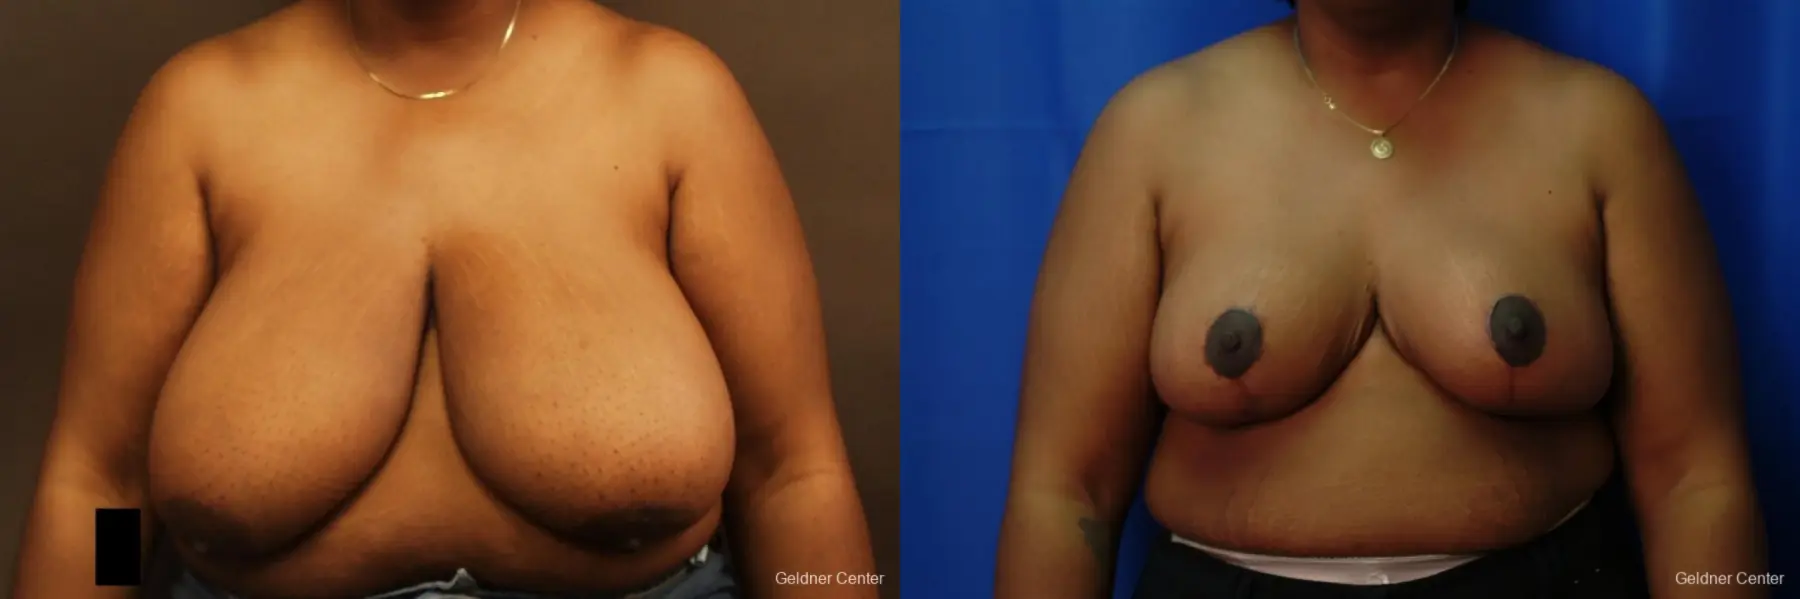 Chicago Breast Reduction 2406 - Before and After 1